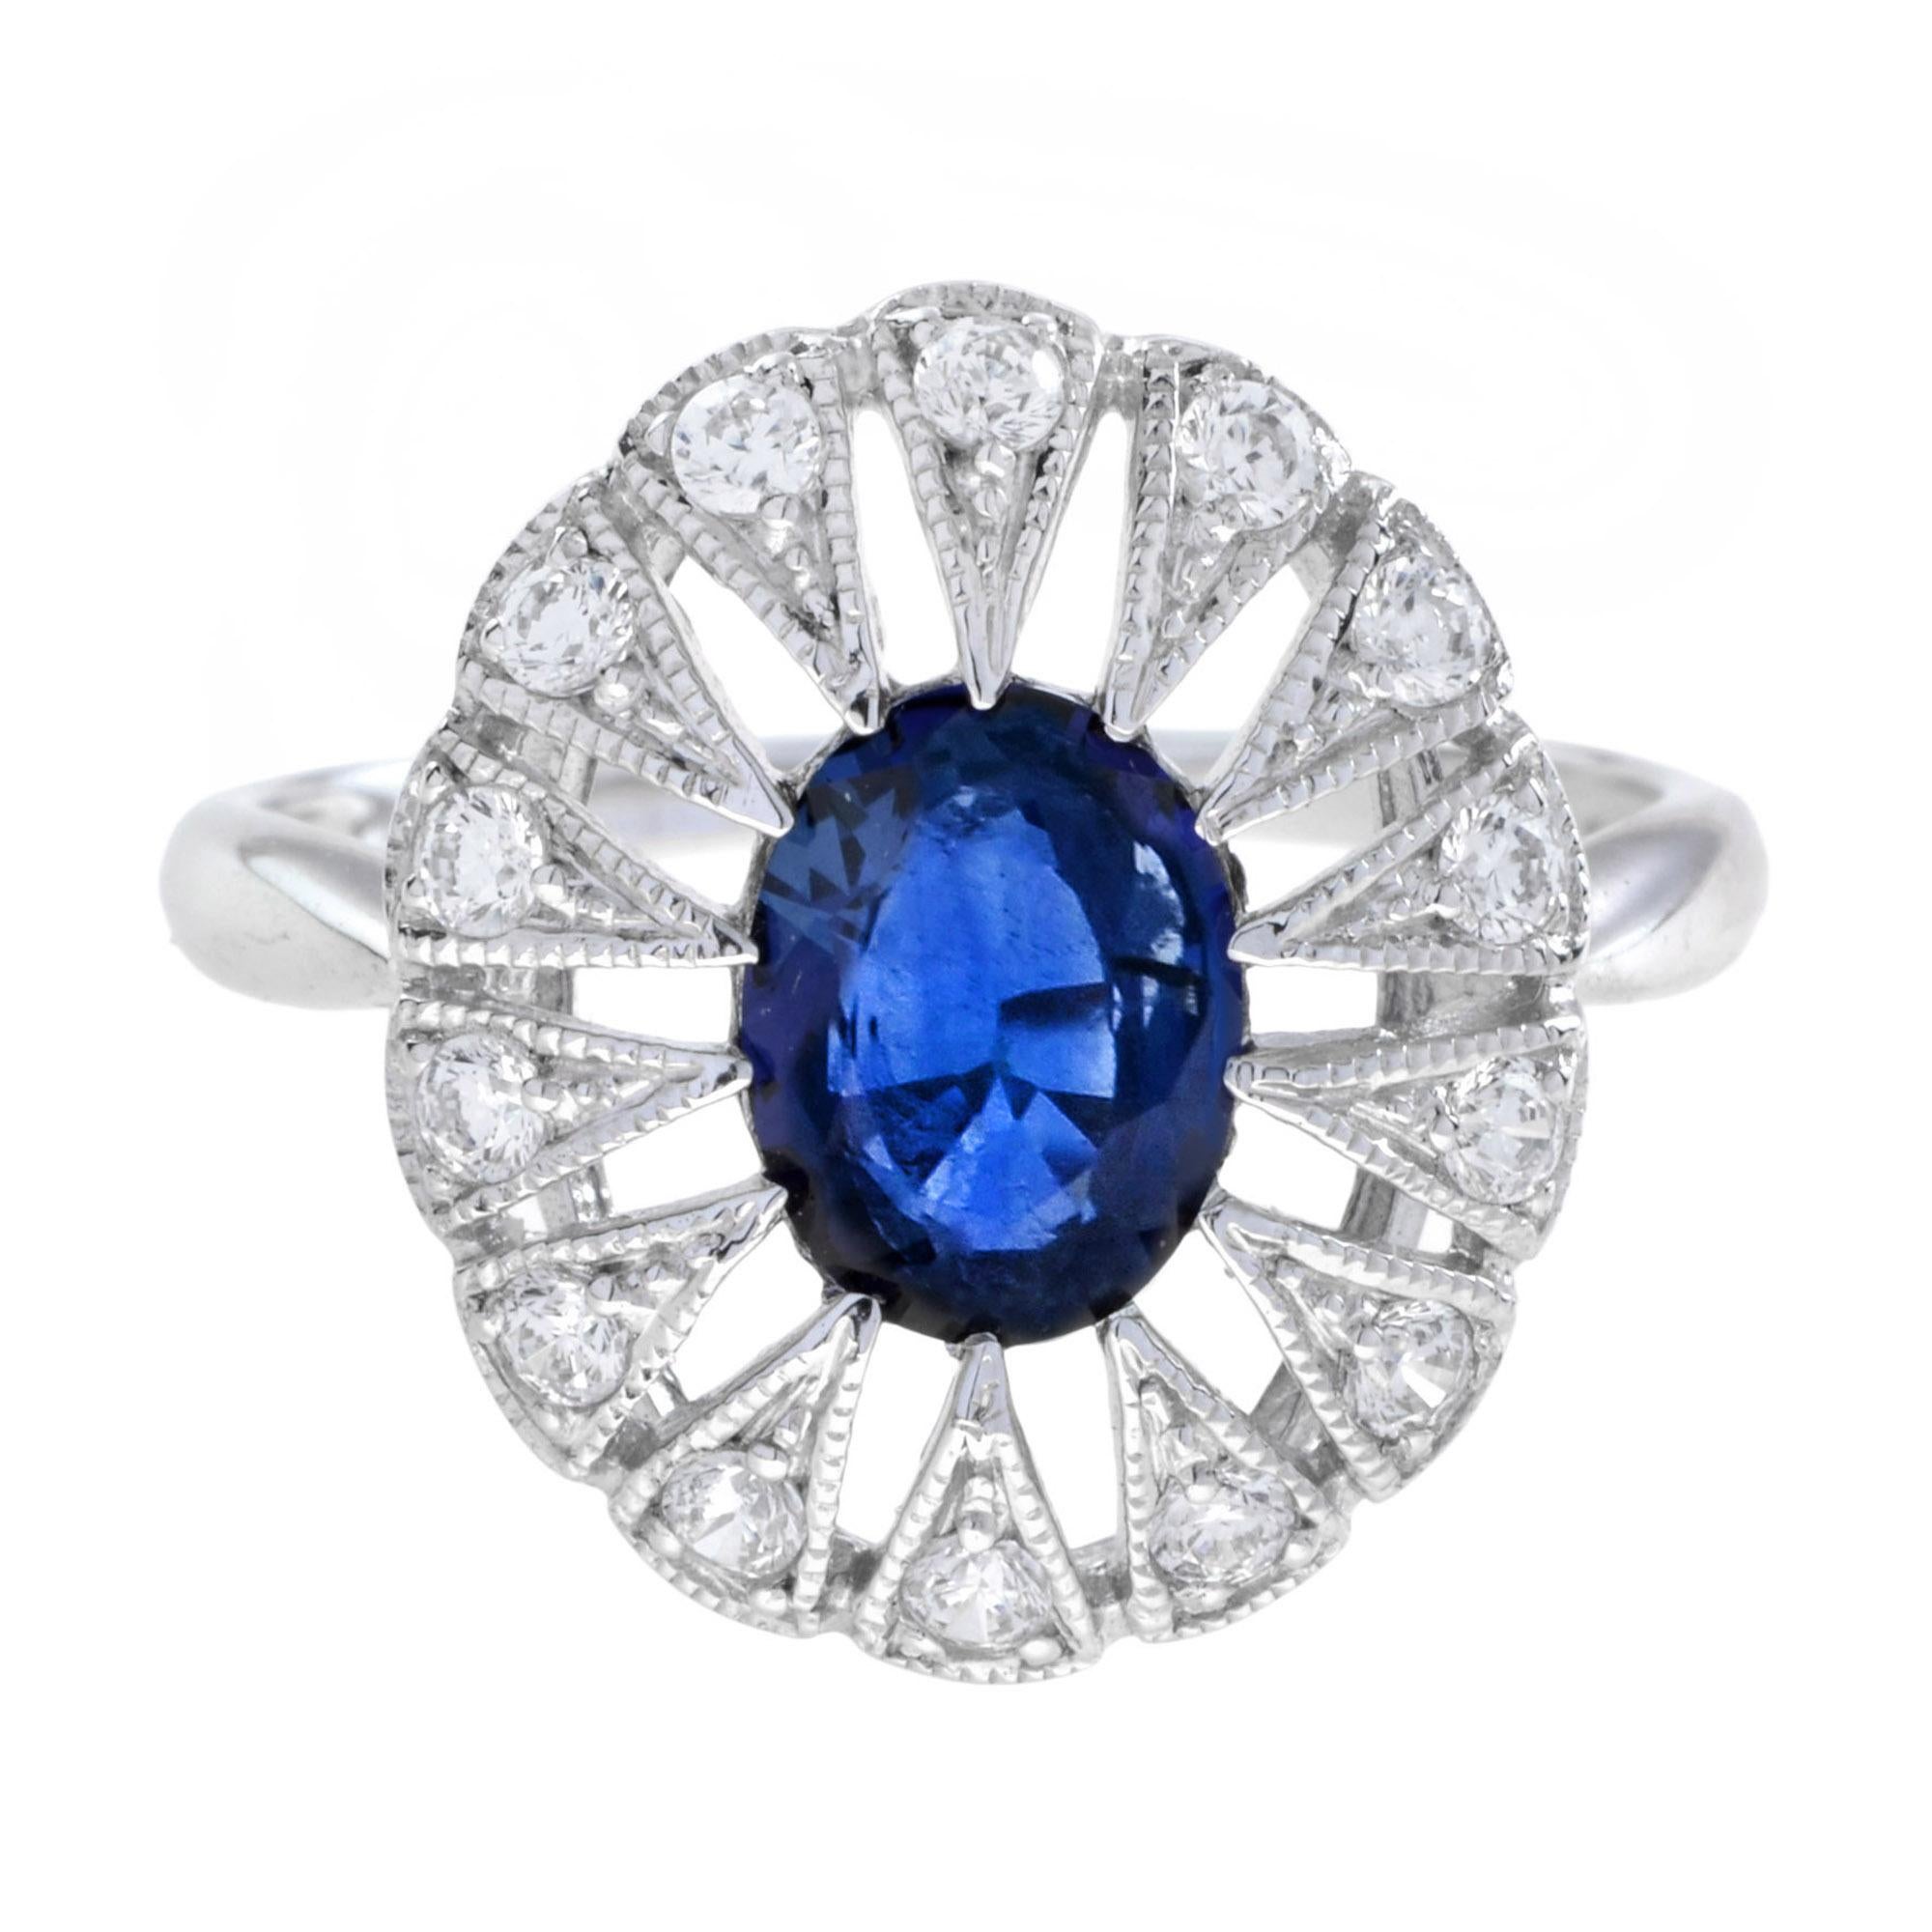 Oval Ceylon Sapphire with Diamond Open Work Halo Ring in 18K White Gold